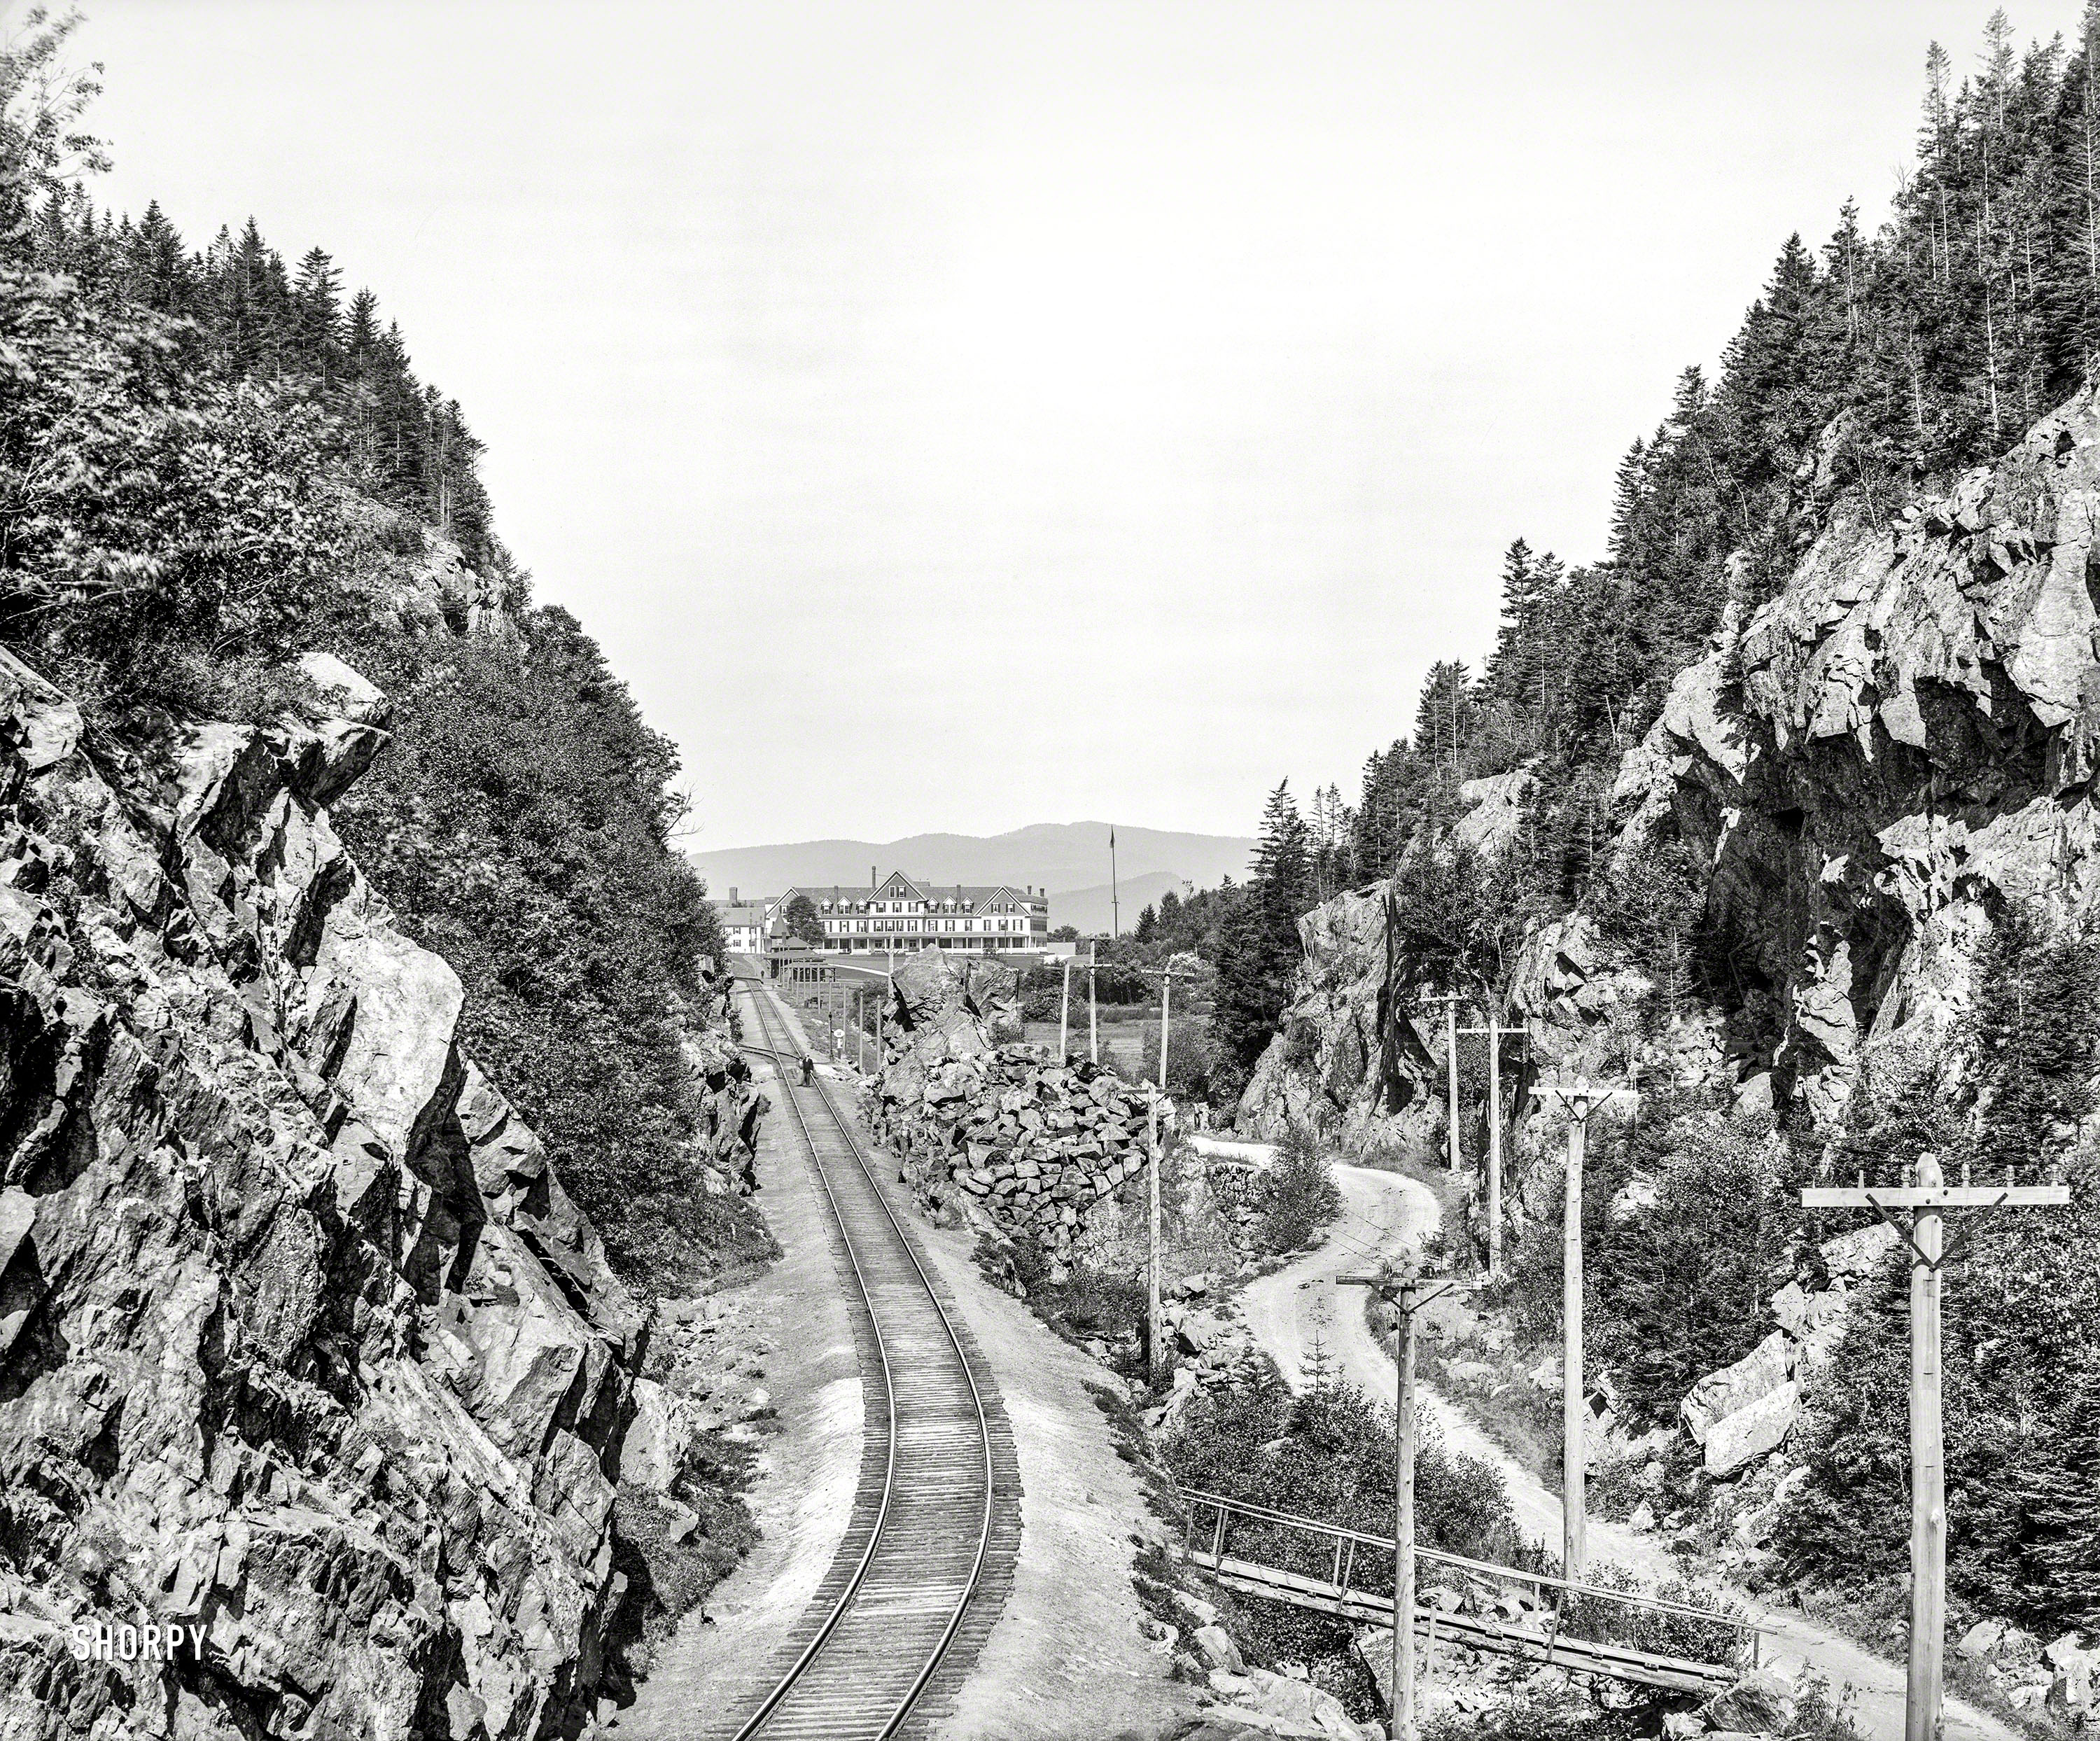 Crawford Notch, New Hampshire, 1907. "Gate of notch toward Crawford House, White Mountains." 8x10 inch dry plate glass negative. View full size.